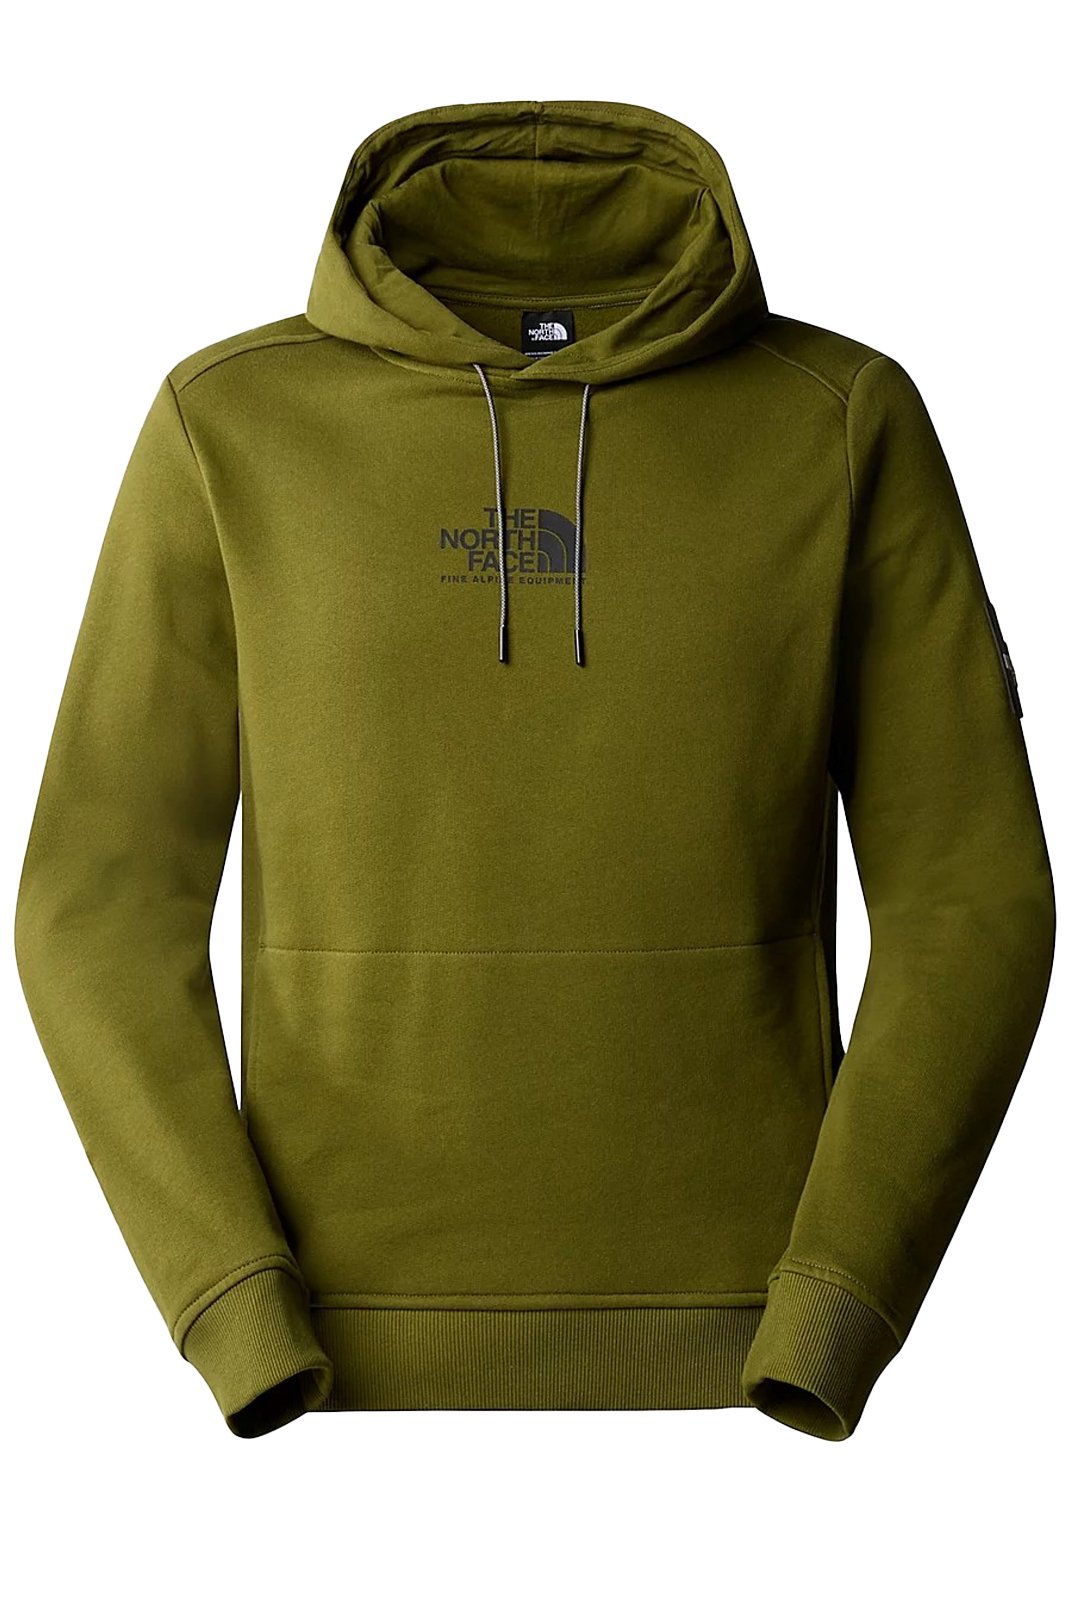 Sweatshirts  The North Face NF0A87F7PIB1 FOREST OLIVE